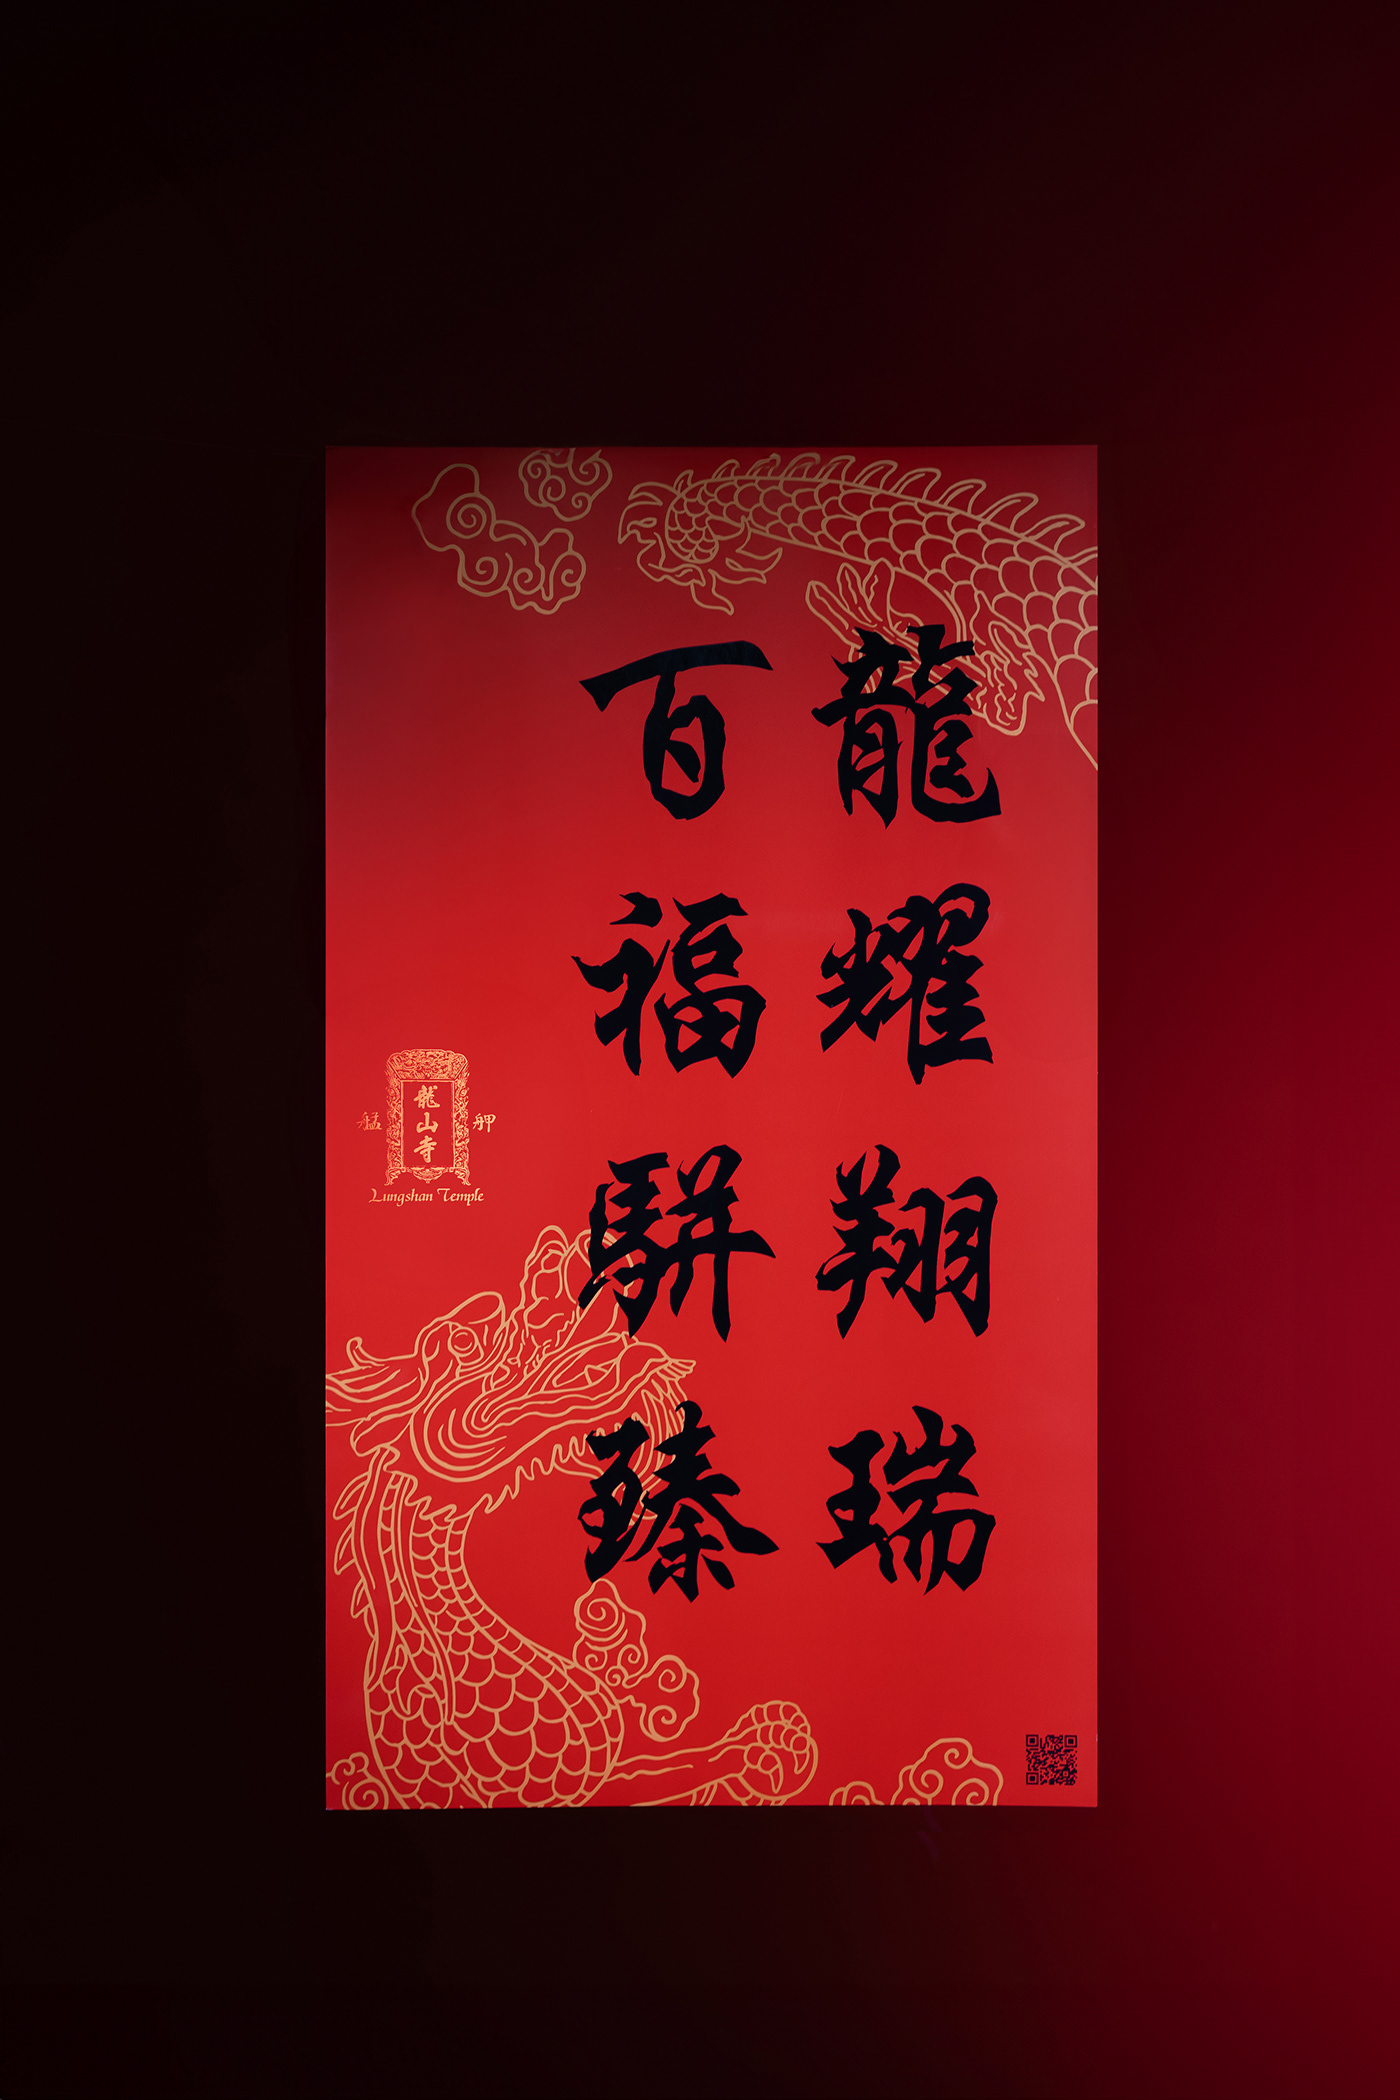 chinese new year dragon graphic design  typography   Advertising  Social media post visual identity temple culture Spring couplets